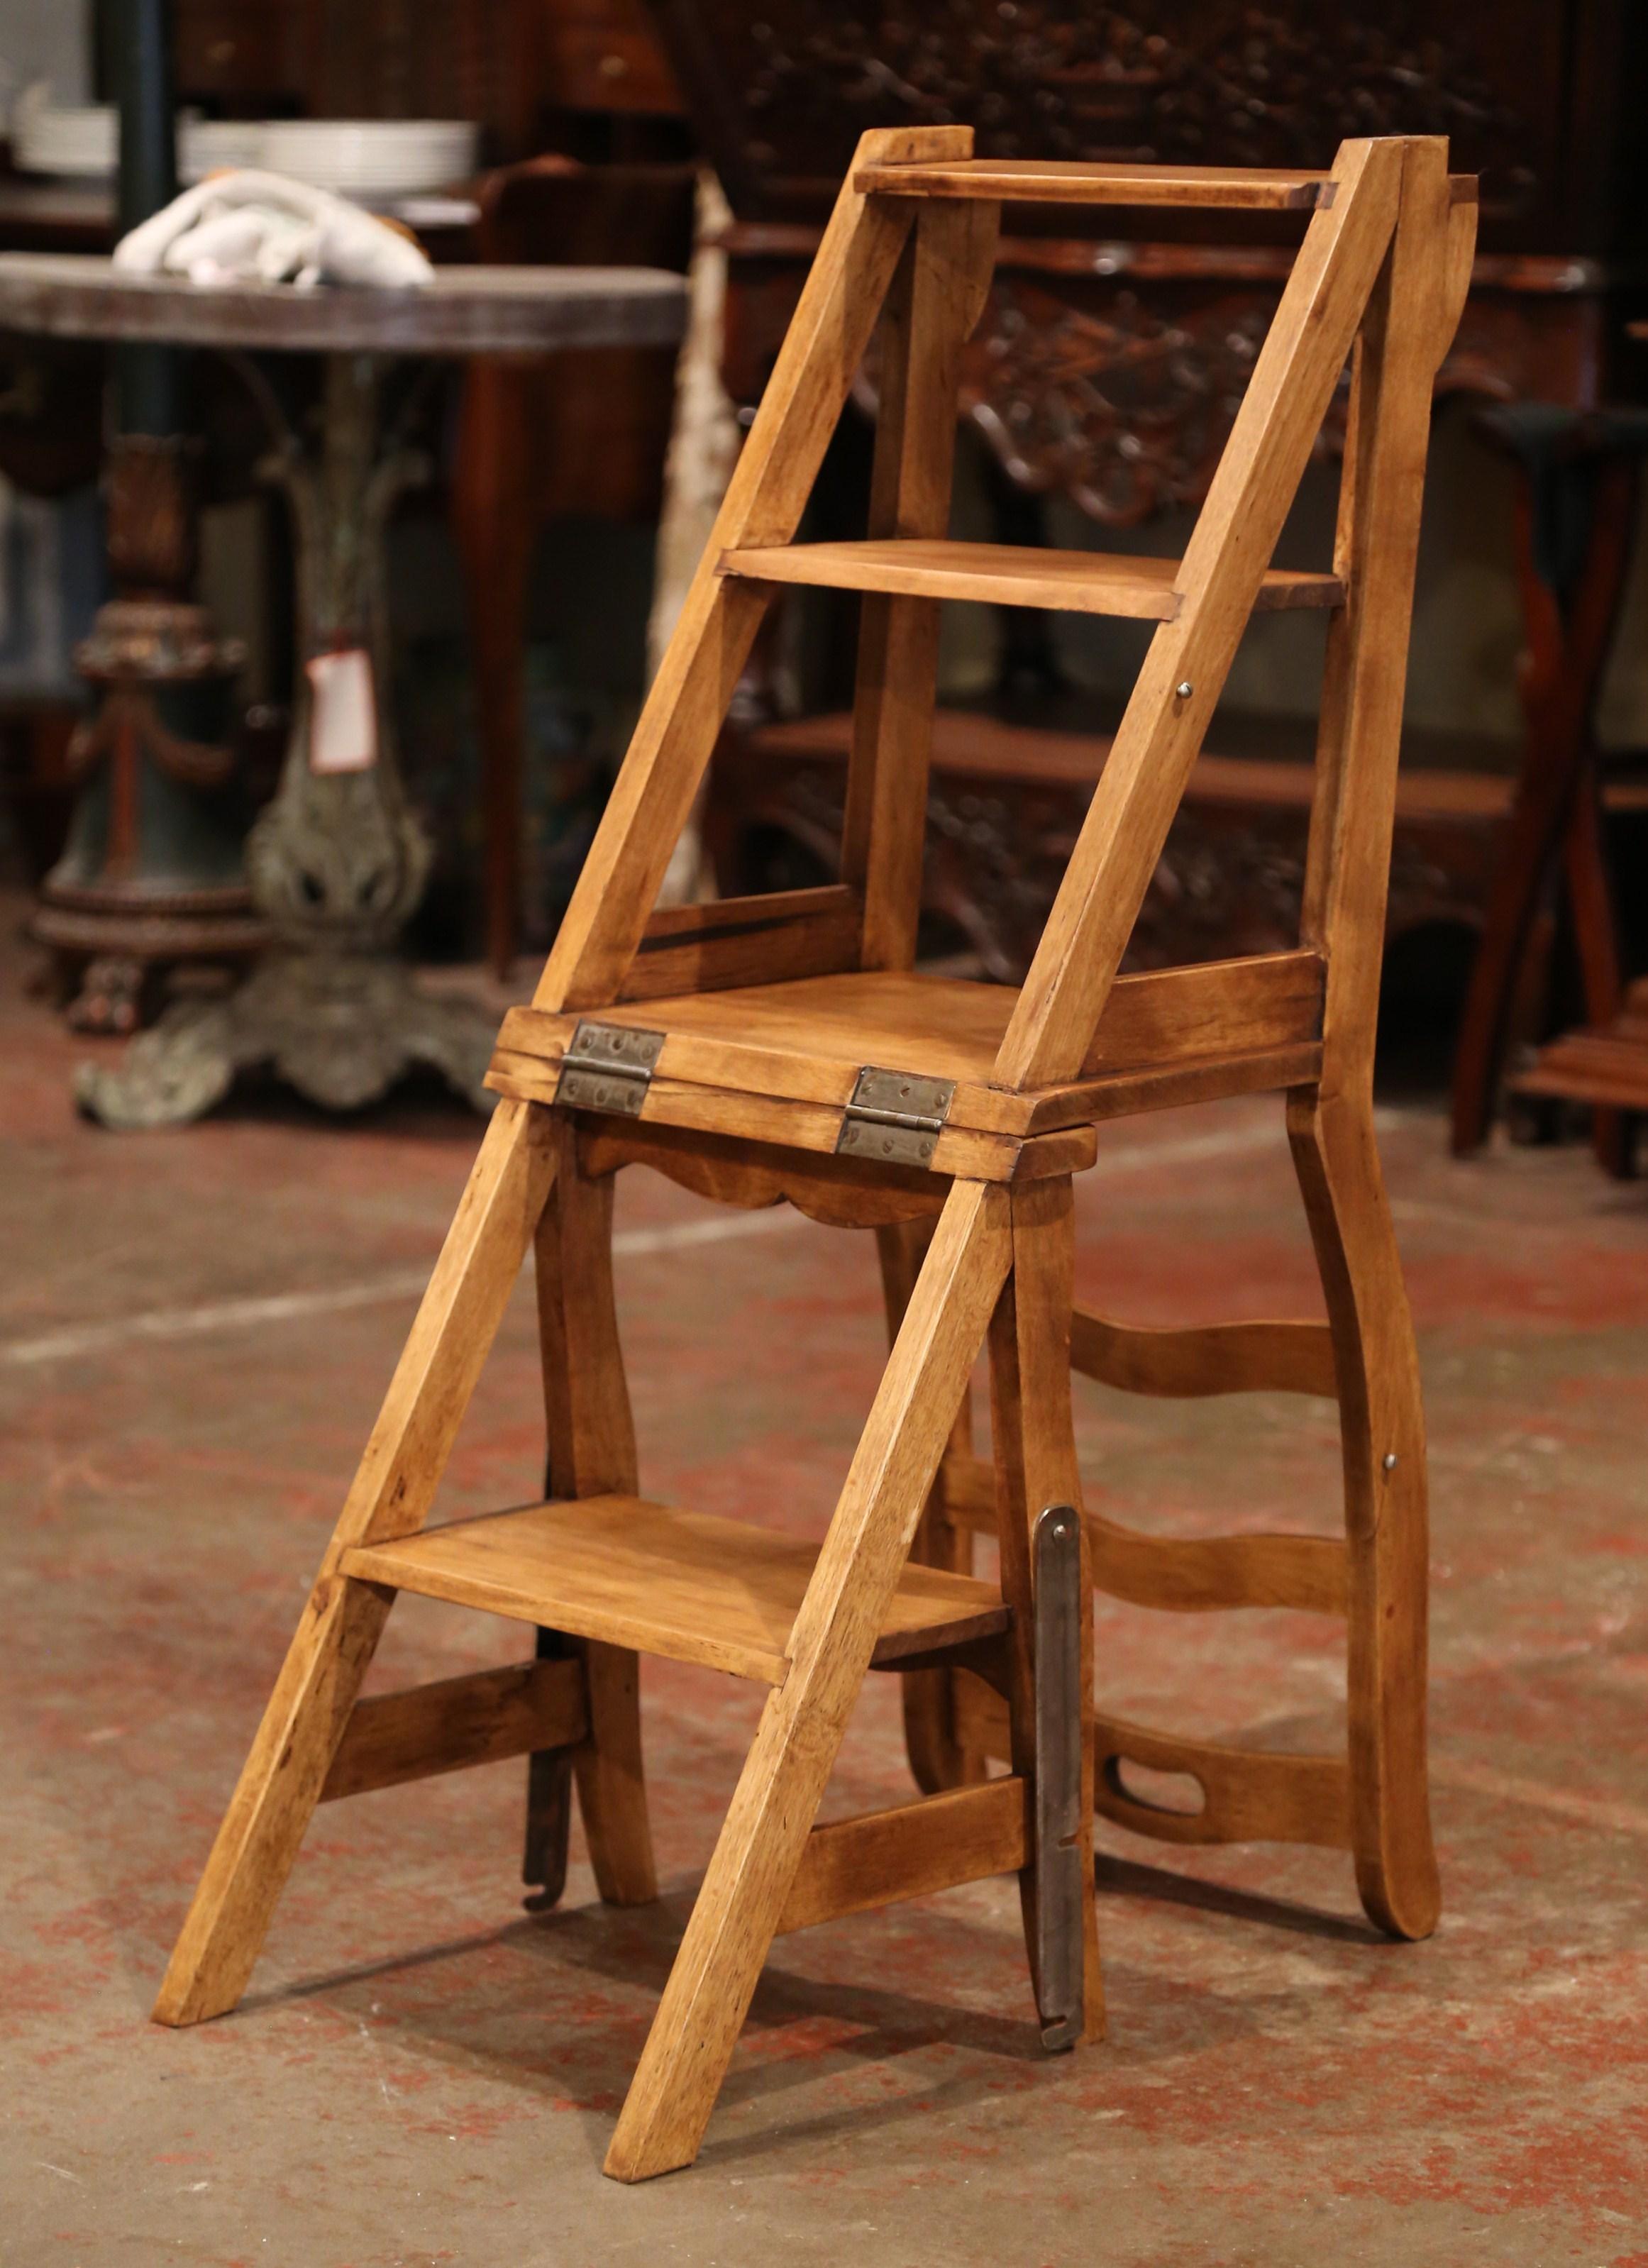 Decorate a library with this artisan-made fruitwood folding step ladder chair; crafted in Southern France circa 1900, the metamorphic chair with three carved ladders in the back, is hinged so that it can convert into a ladder with four stairs for a